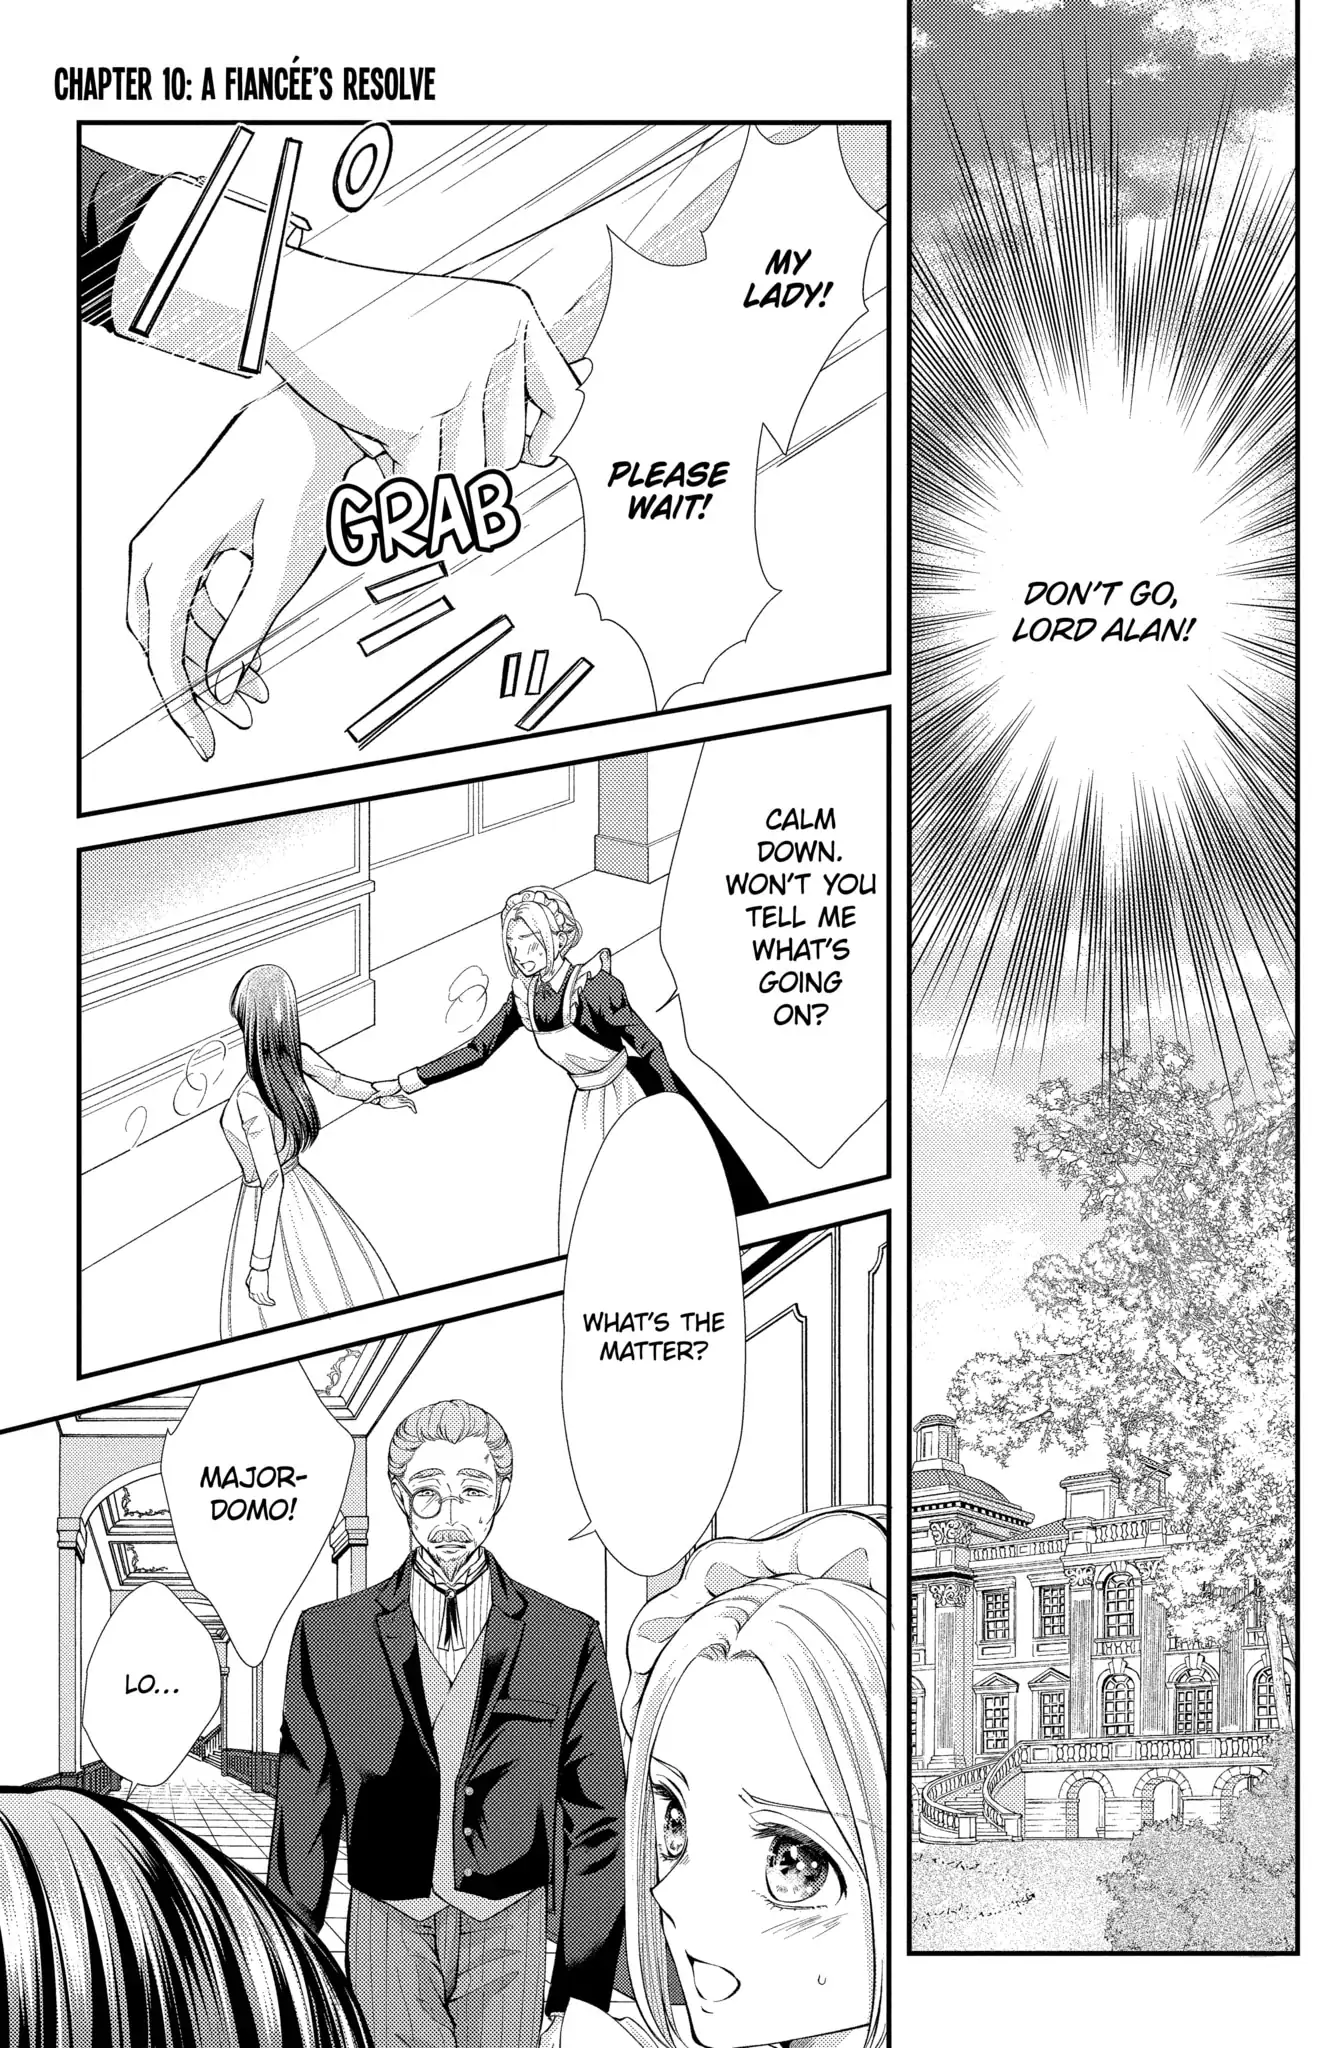 The Duchess Of The Attic The Betrayed Woman's Prince - Volume 3 Chapter 10.1 A Fiancée's Resolve (1)  - Coffee Manga